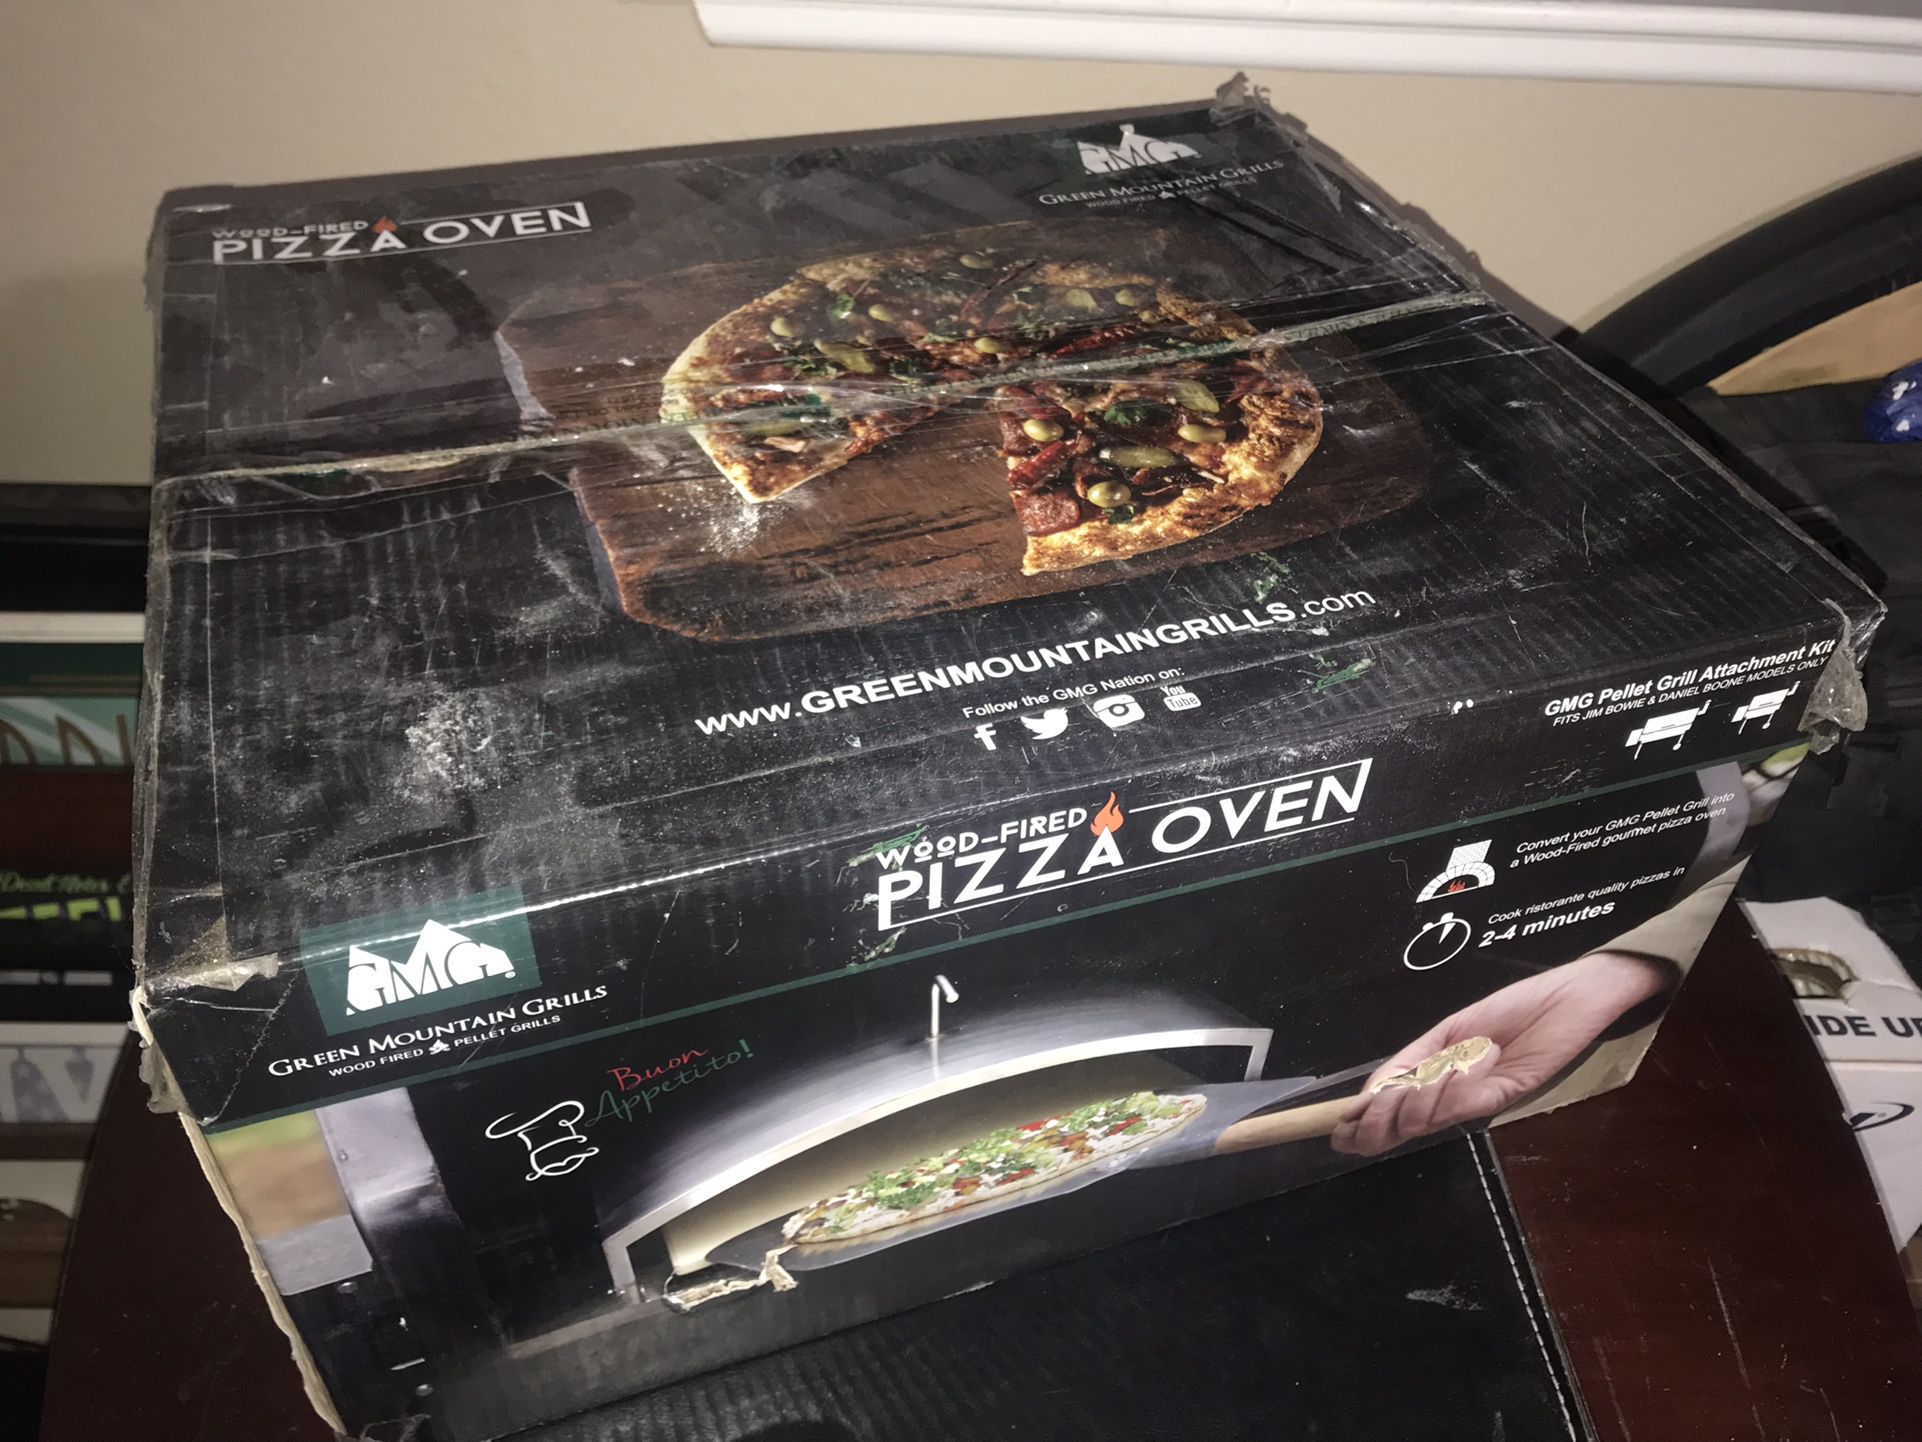 Fritid spids Diktatur Pizza Oven For Green Mountain Grill for Sale in Las Vegas, NV - OfferUp